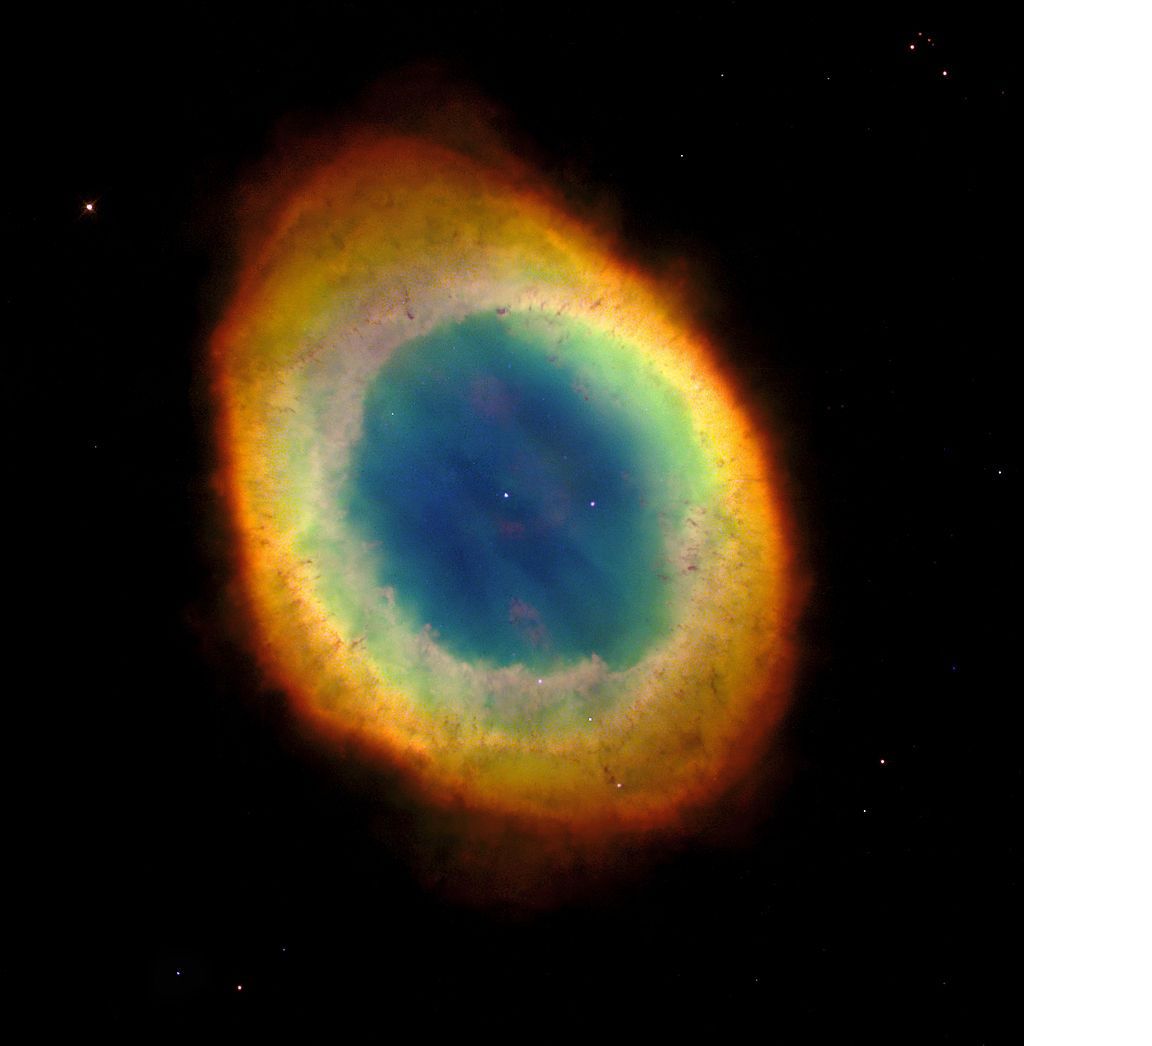 Ring Nebula image answers questions over future of Sun - PressReader